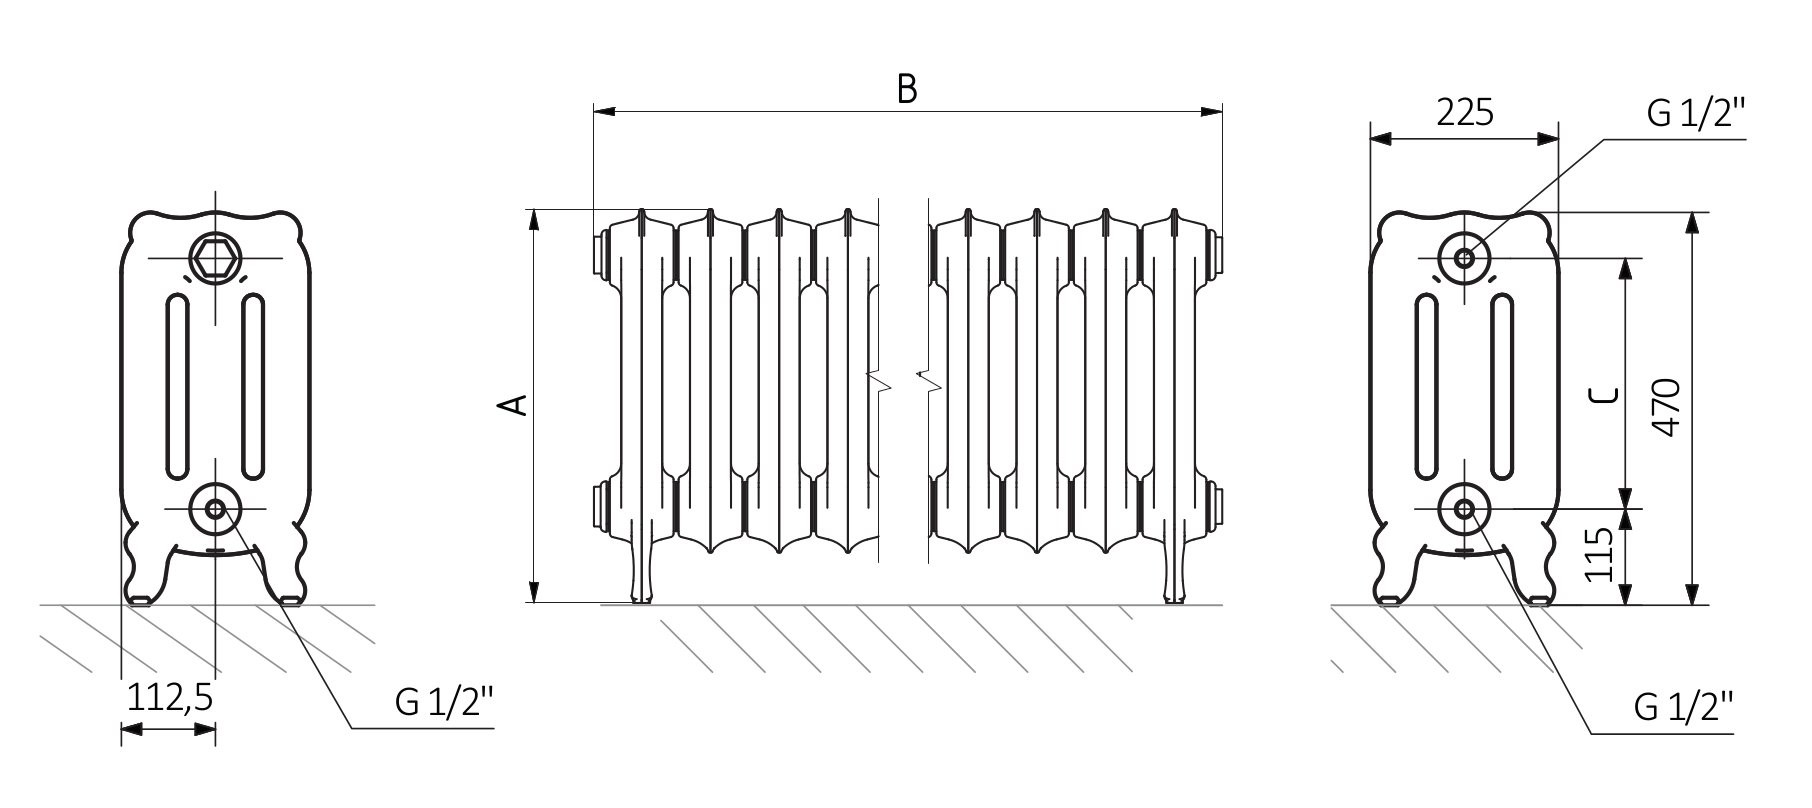 A - height B - width C1-C5 - connection spacing D - distance between fixings horizontally E - distance between attachments vertically F - distance from the lower axle of fixings to the bottom edge of the collector
